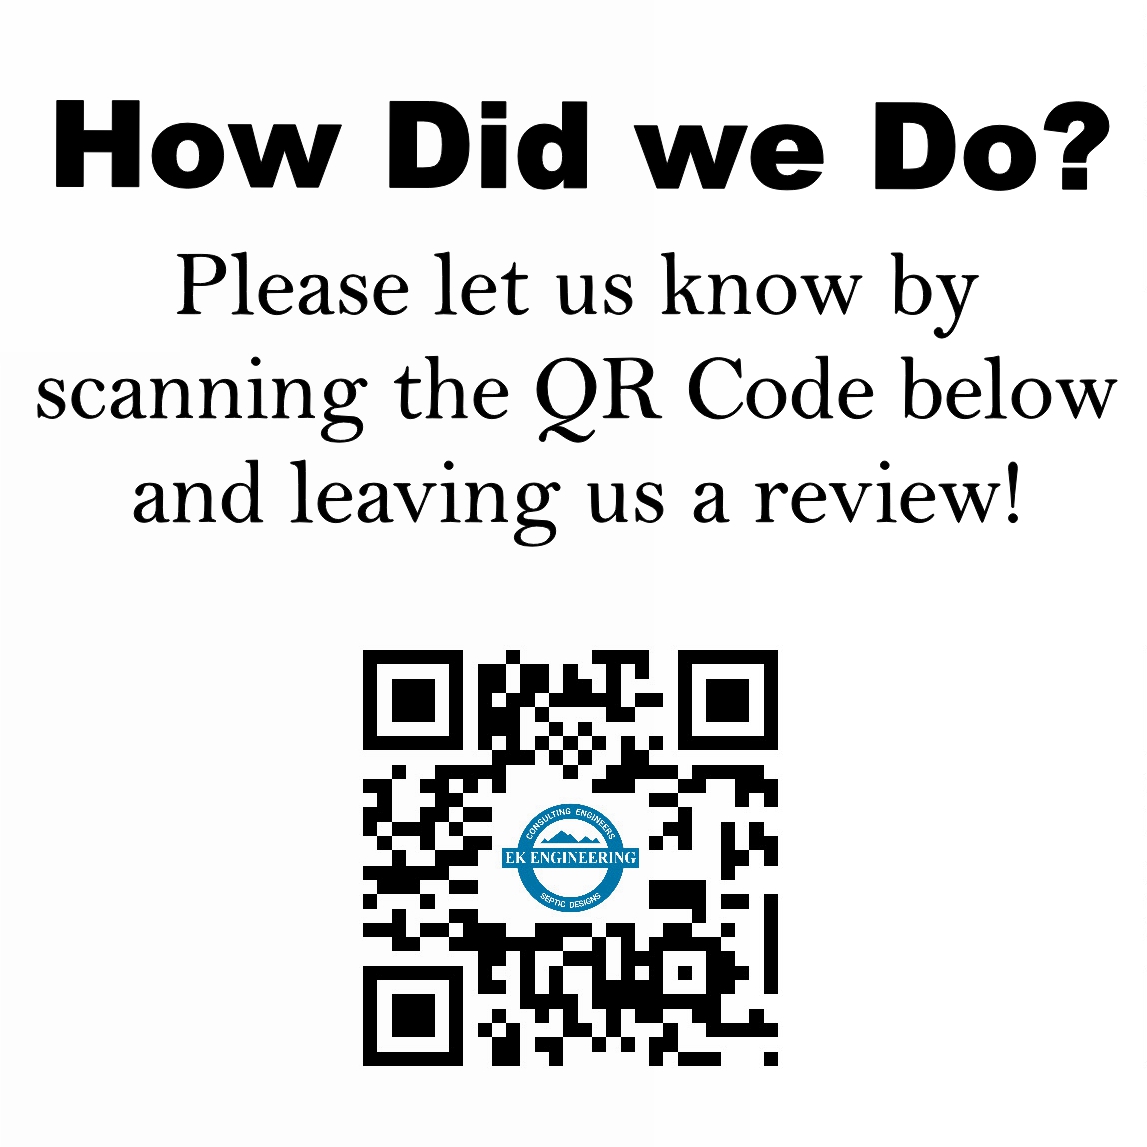 Leave us a review! 